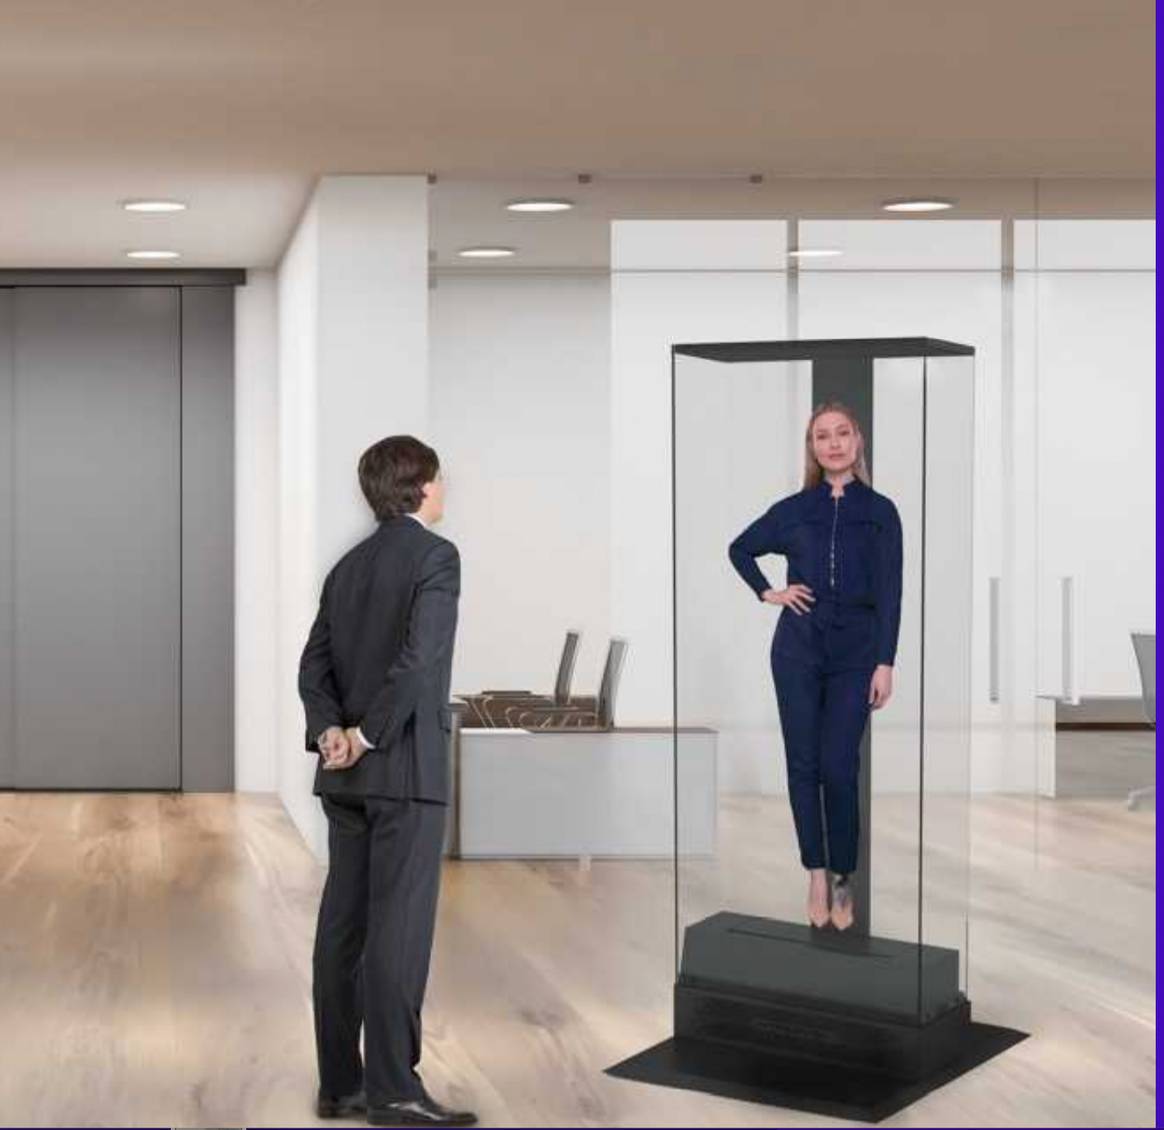 Holograms can offer in store assistance, as well as model looks
from current range